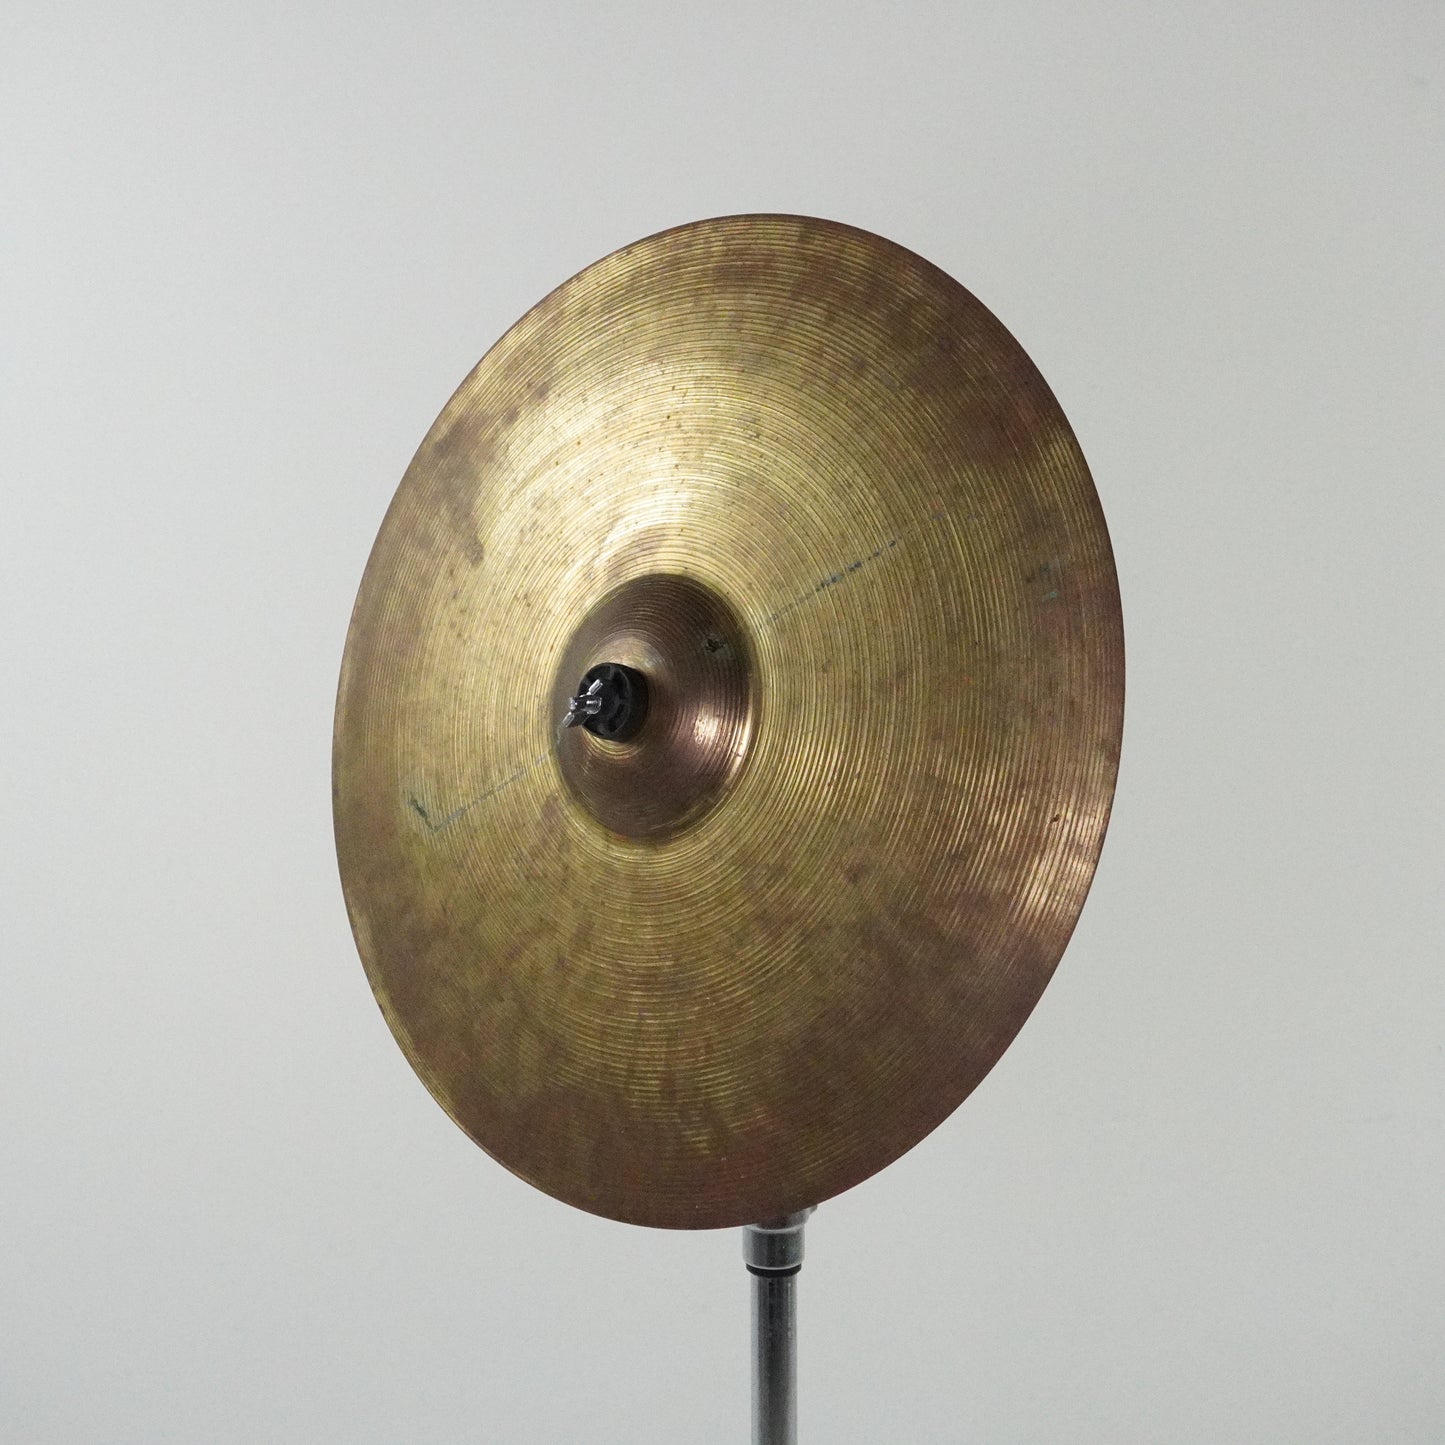 20" Second Hand Ride Cymbal